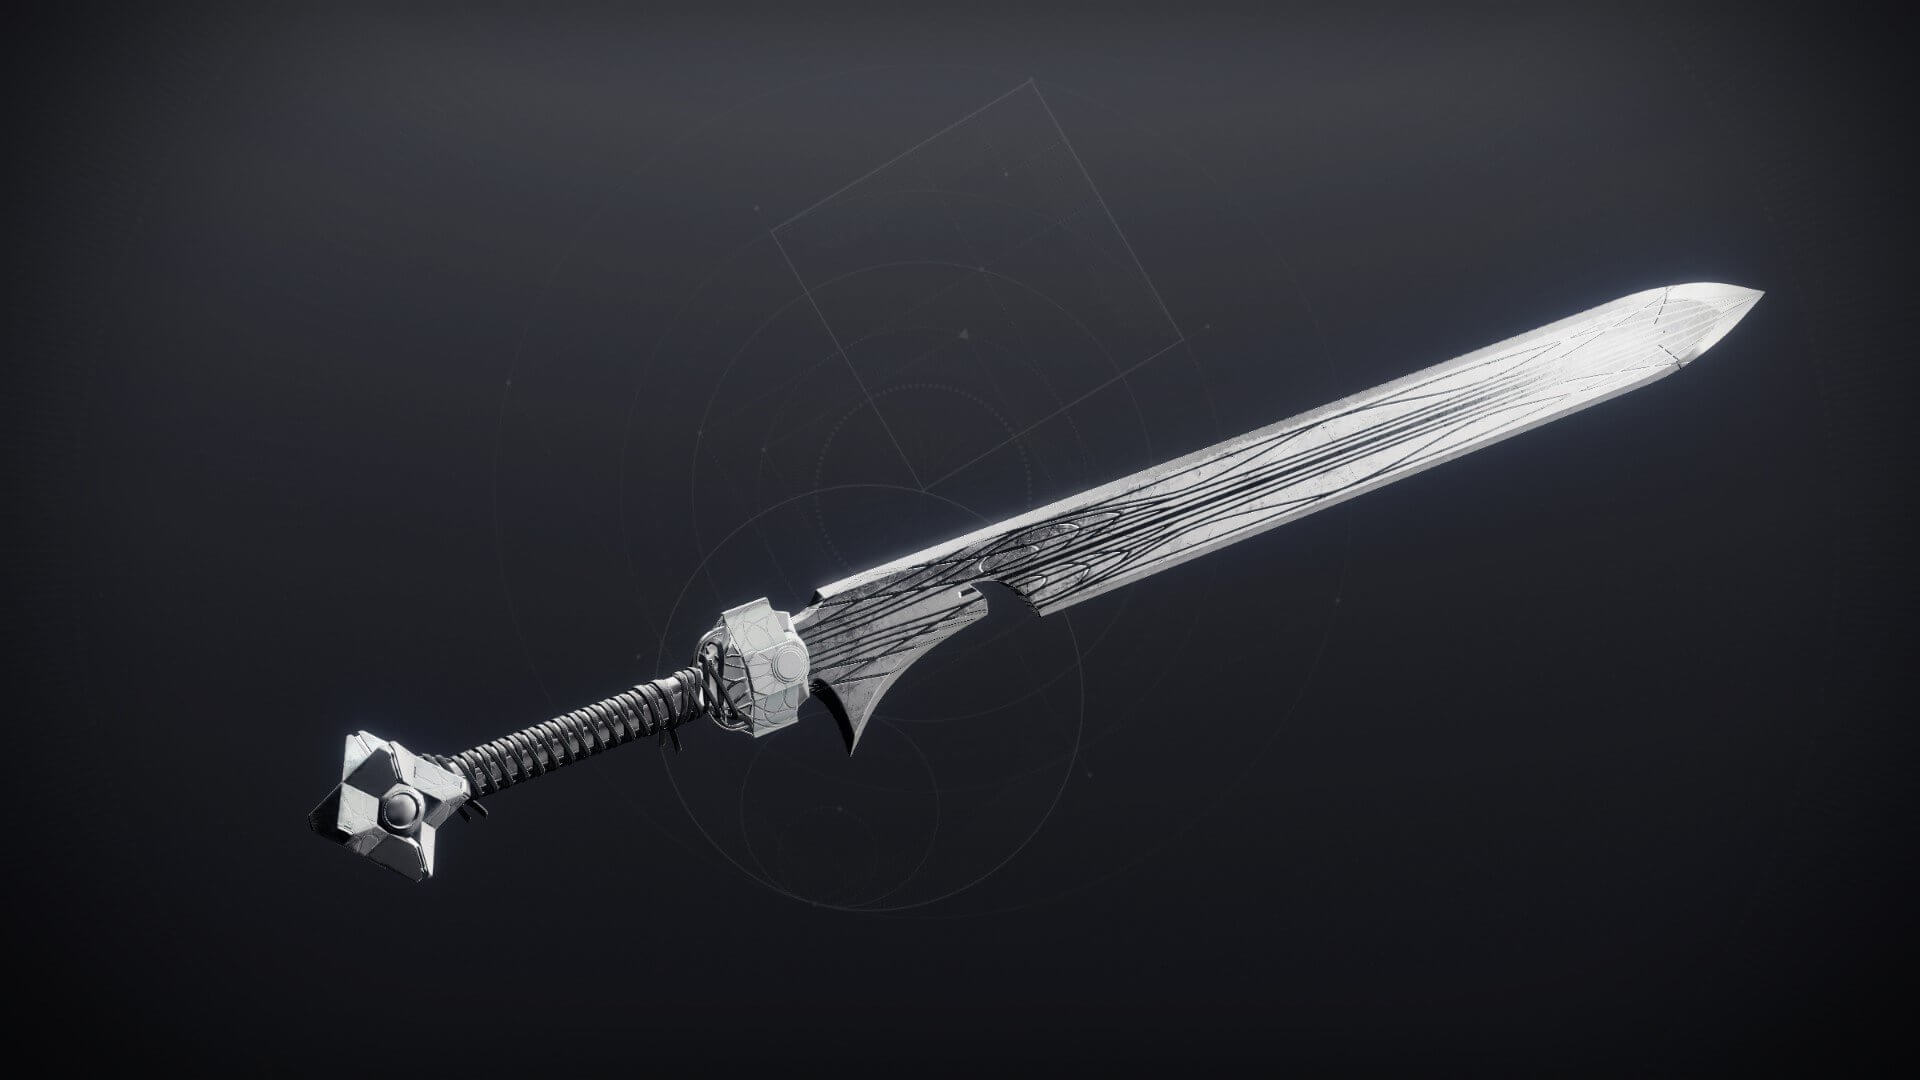 How To Get Ergo Sum Exotic Sword In Destiny 2 - Complete Guide